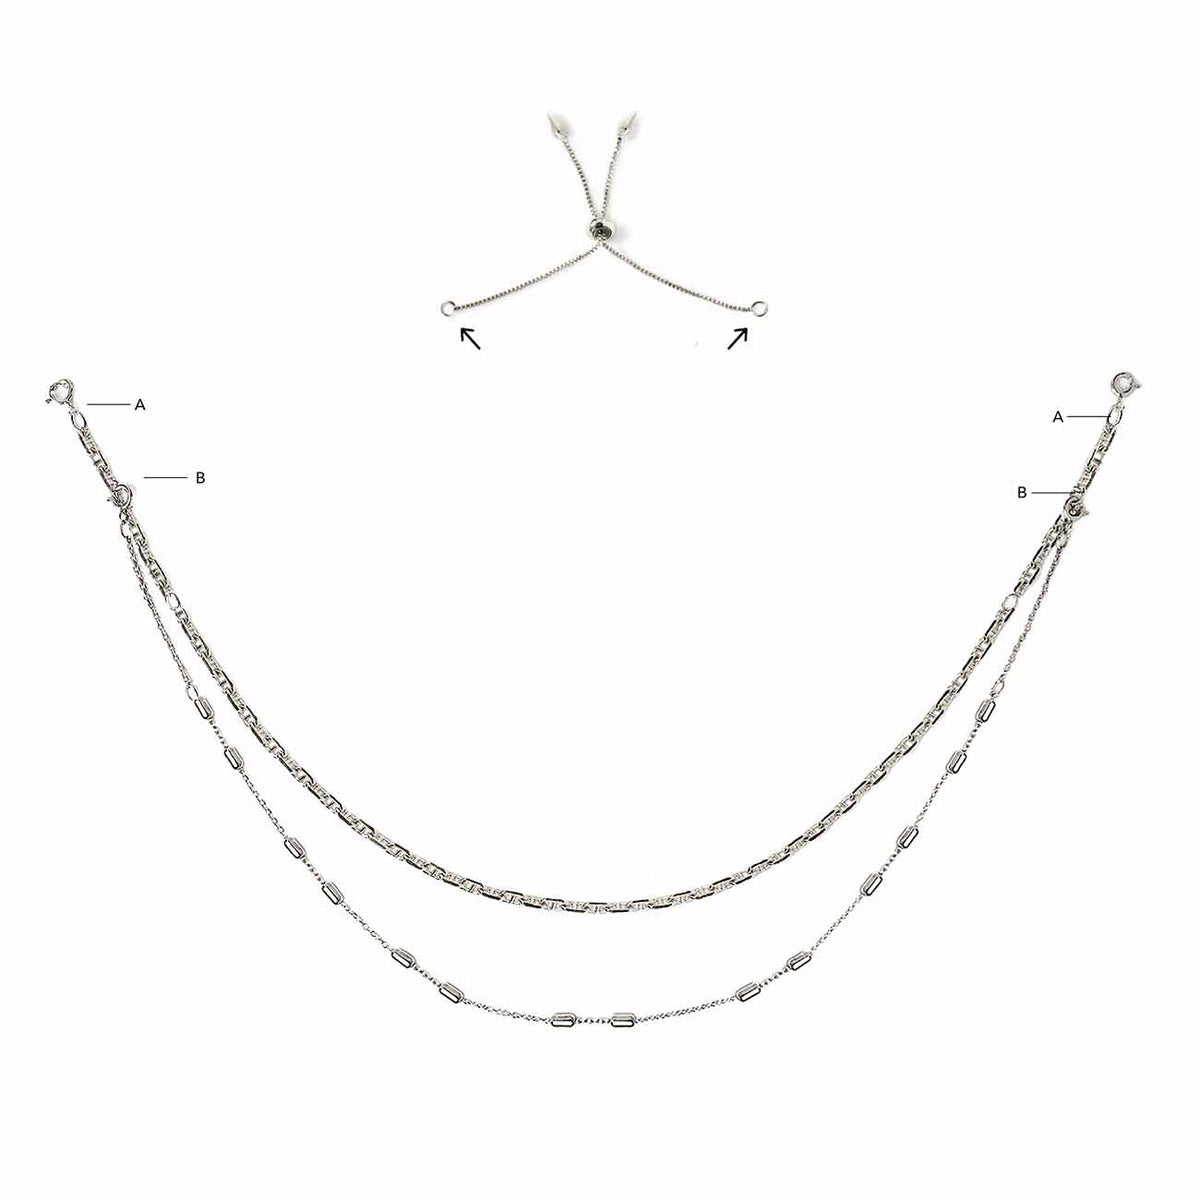 Choker Necklace Extender, Jewelry Extension Gold – AMYO Bridal